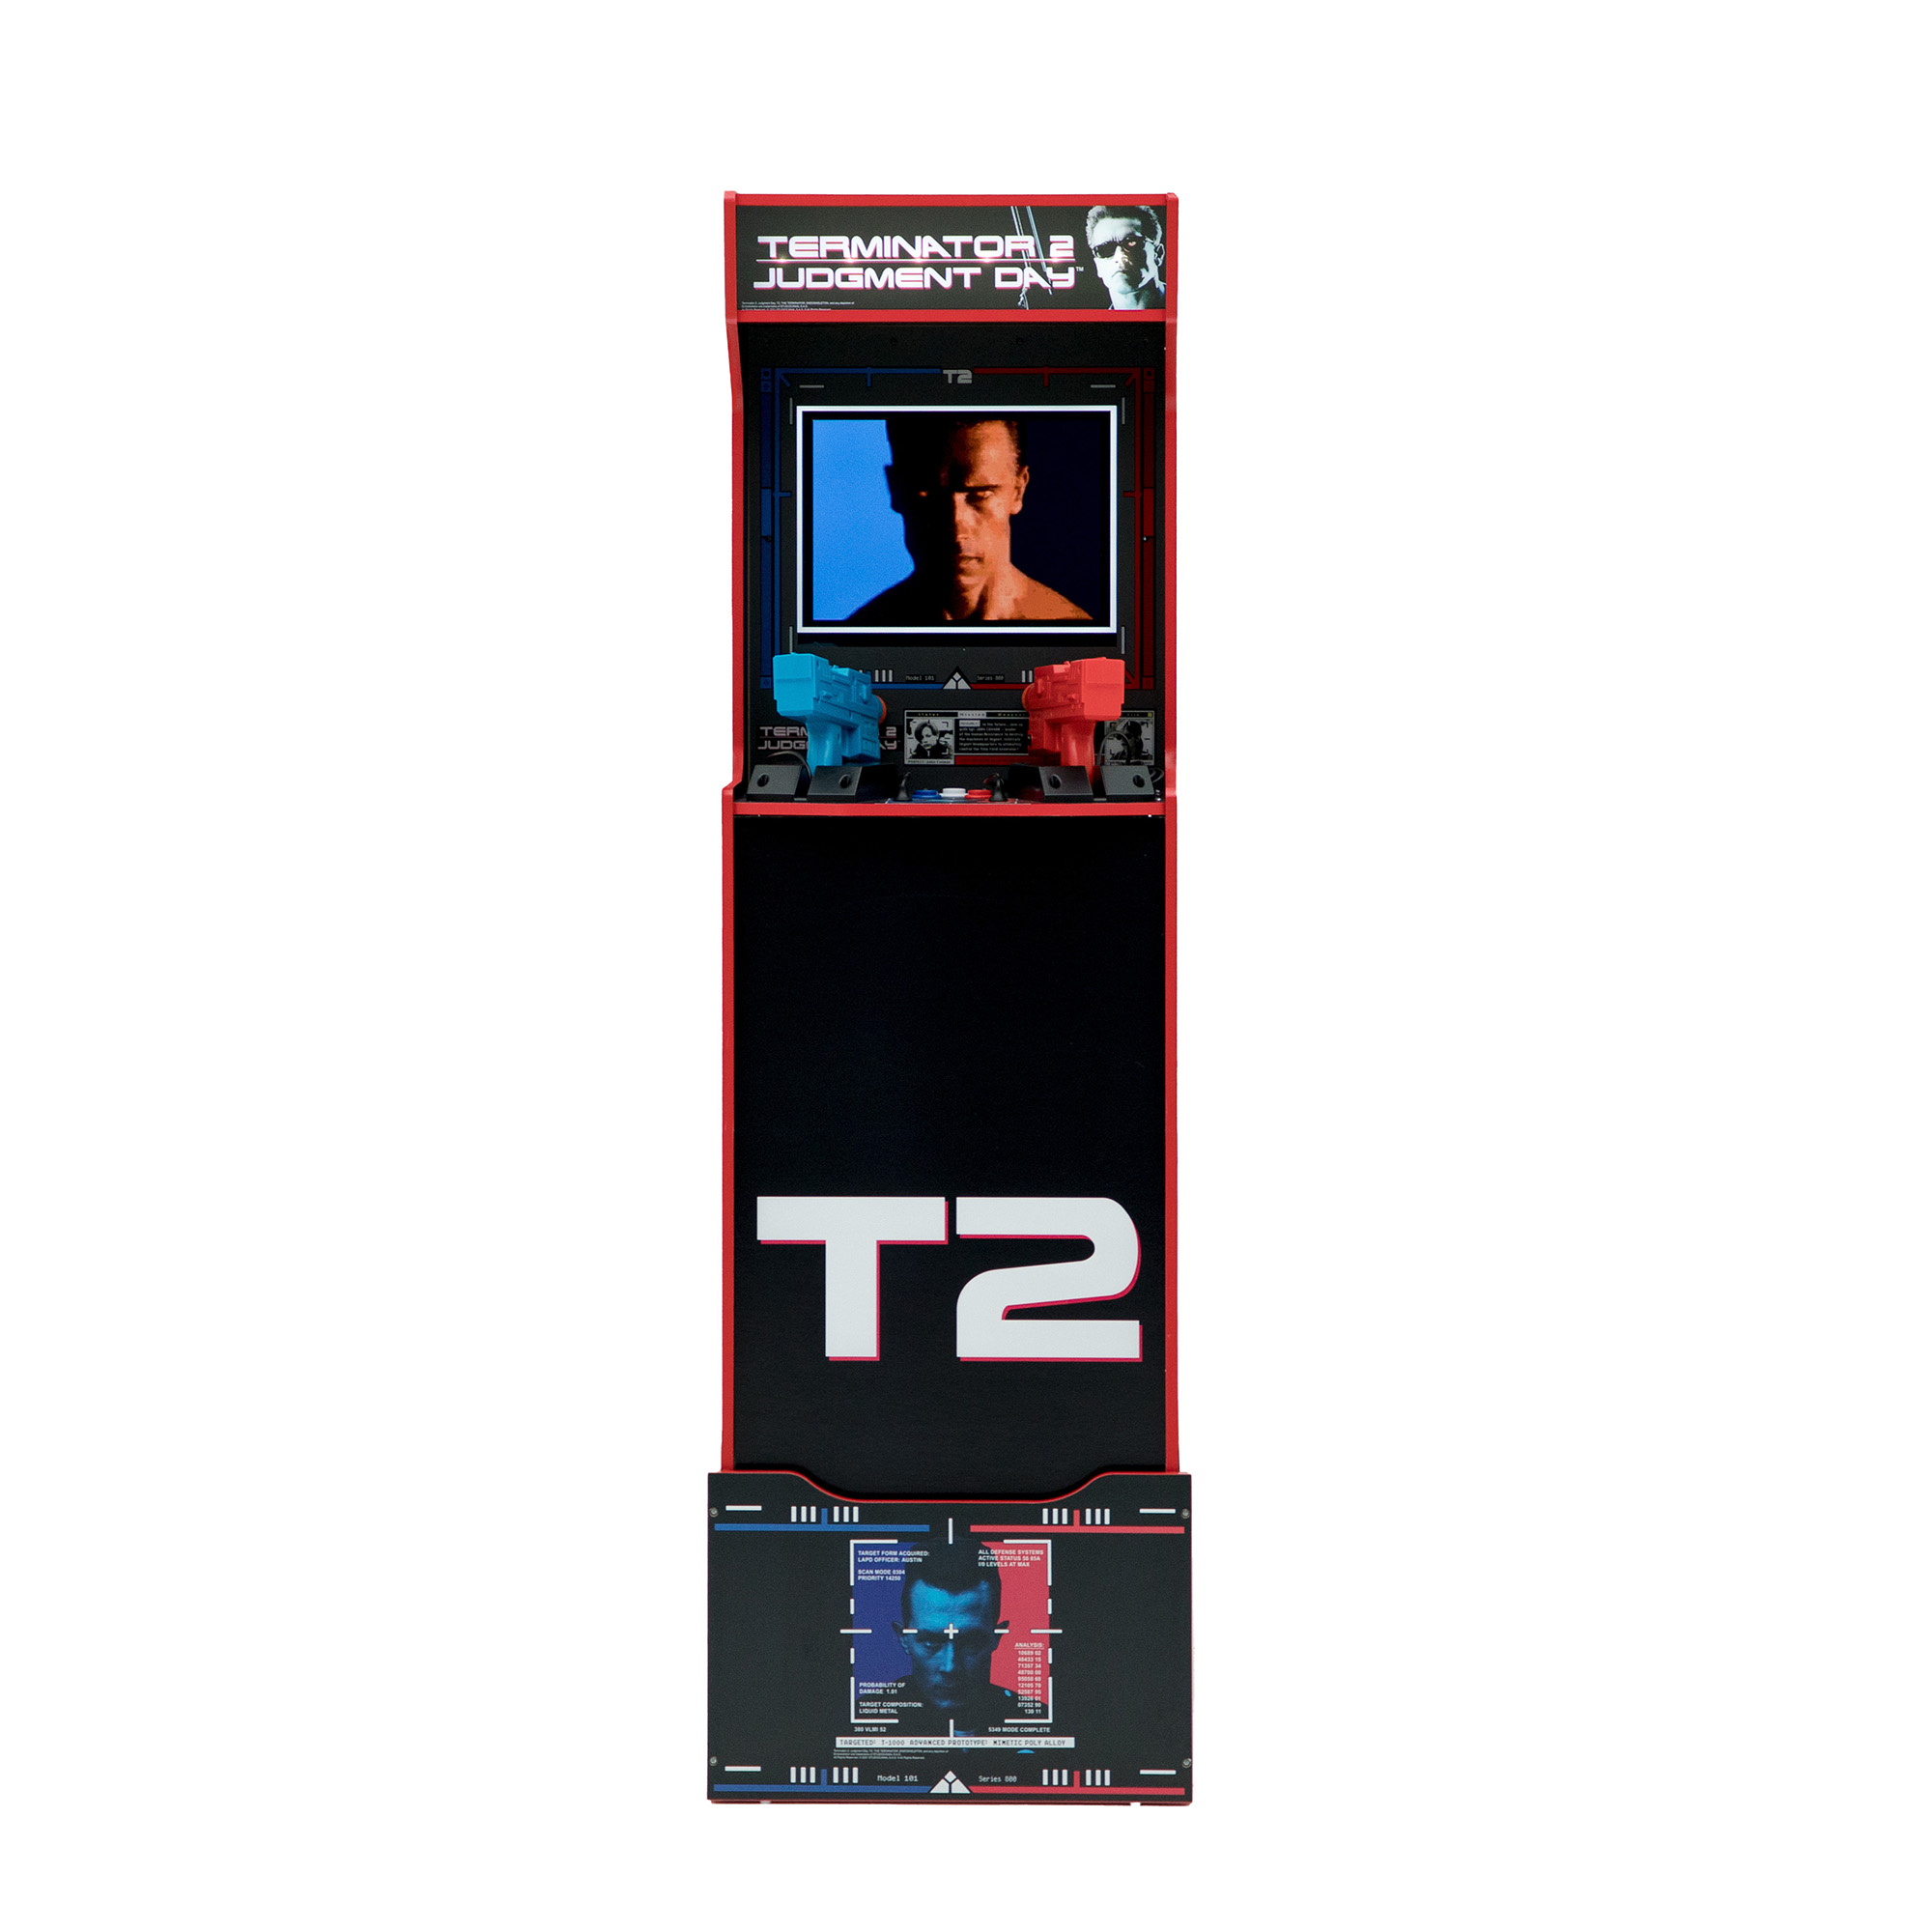 Arcade1Up - Terminator 2: Judgment Day With Riser and Lit Marquee, Arcade Game Machine - image 5 of 13